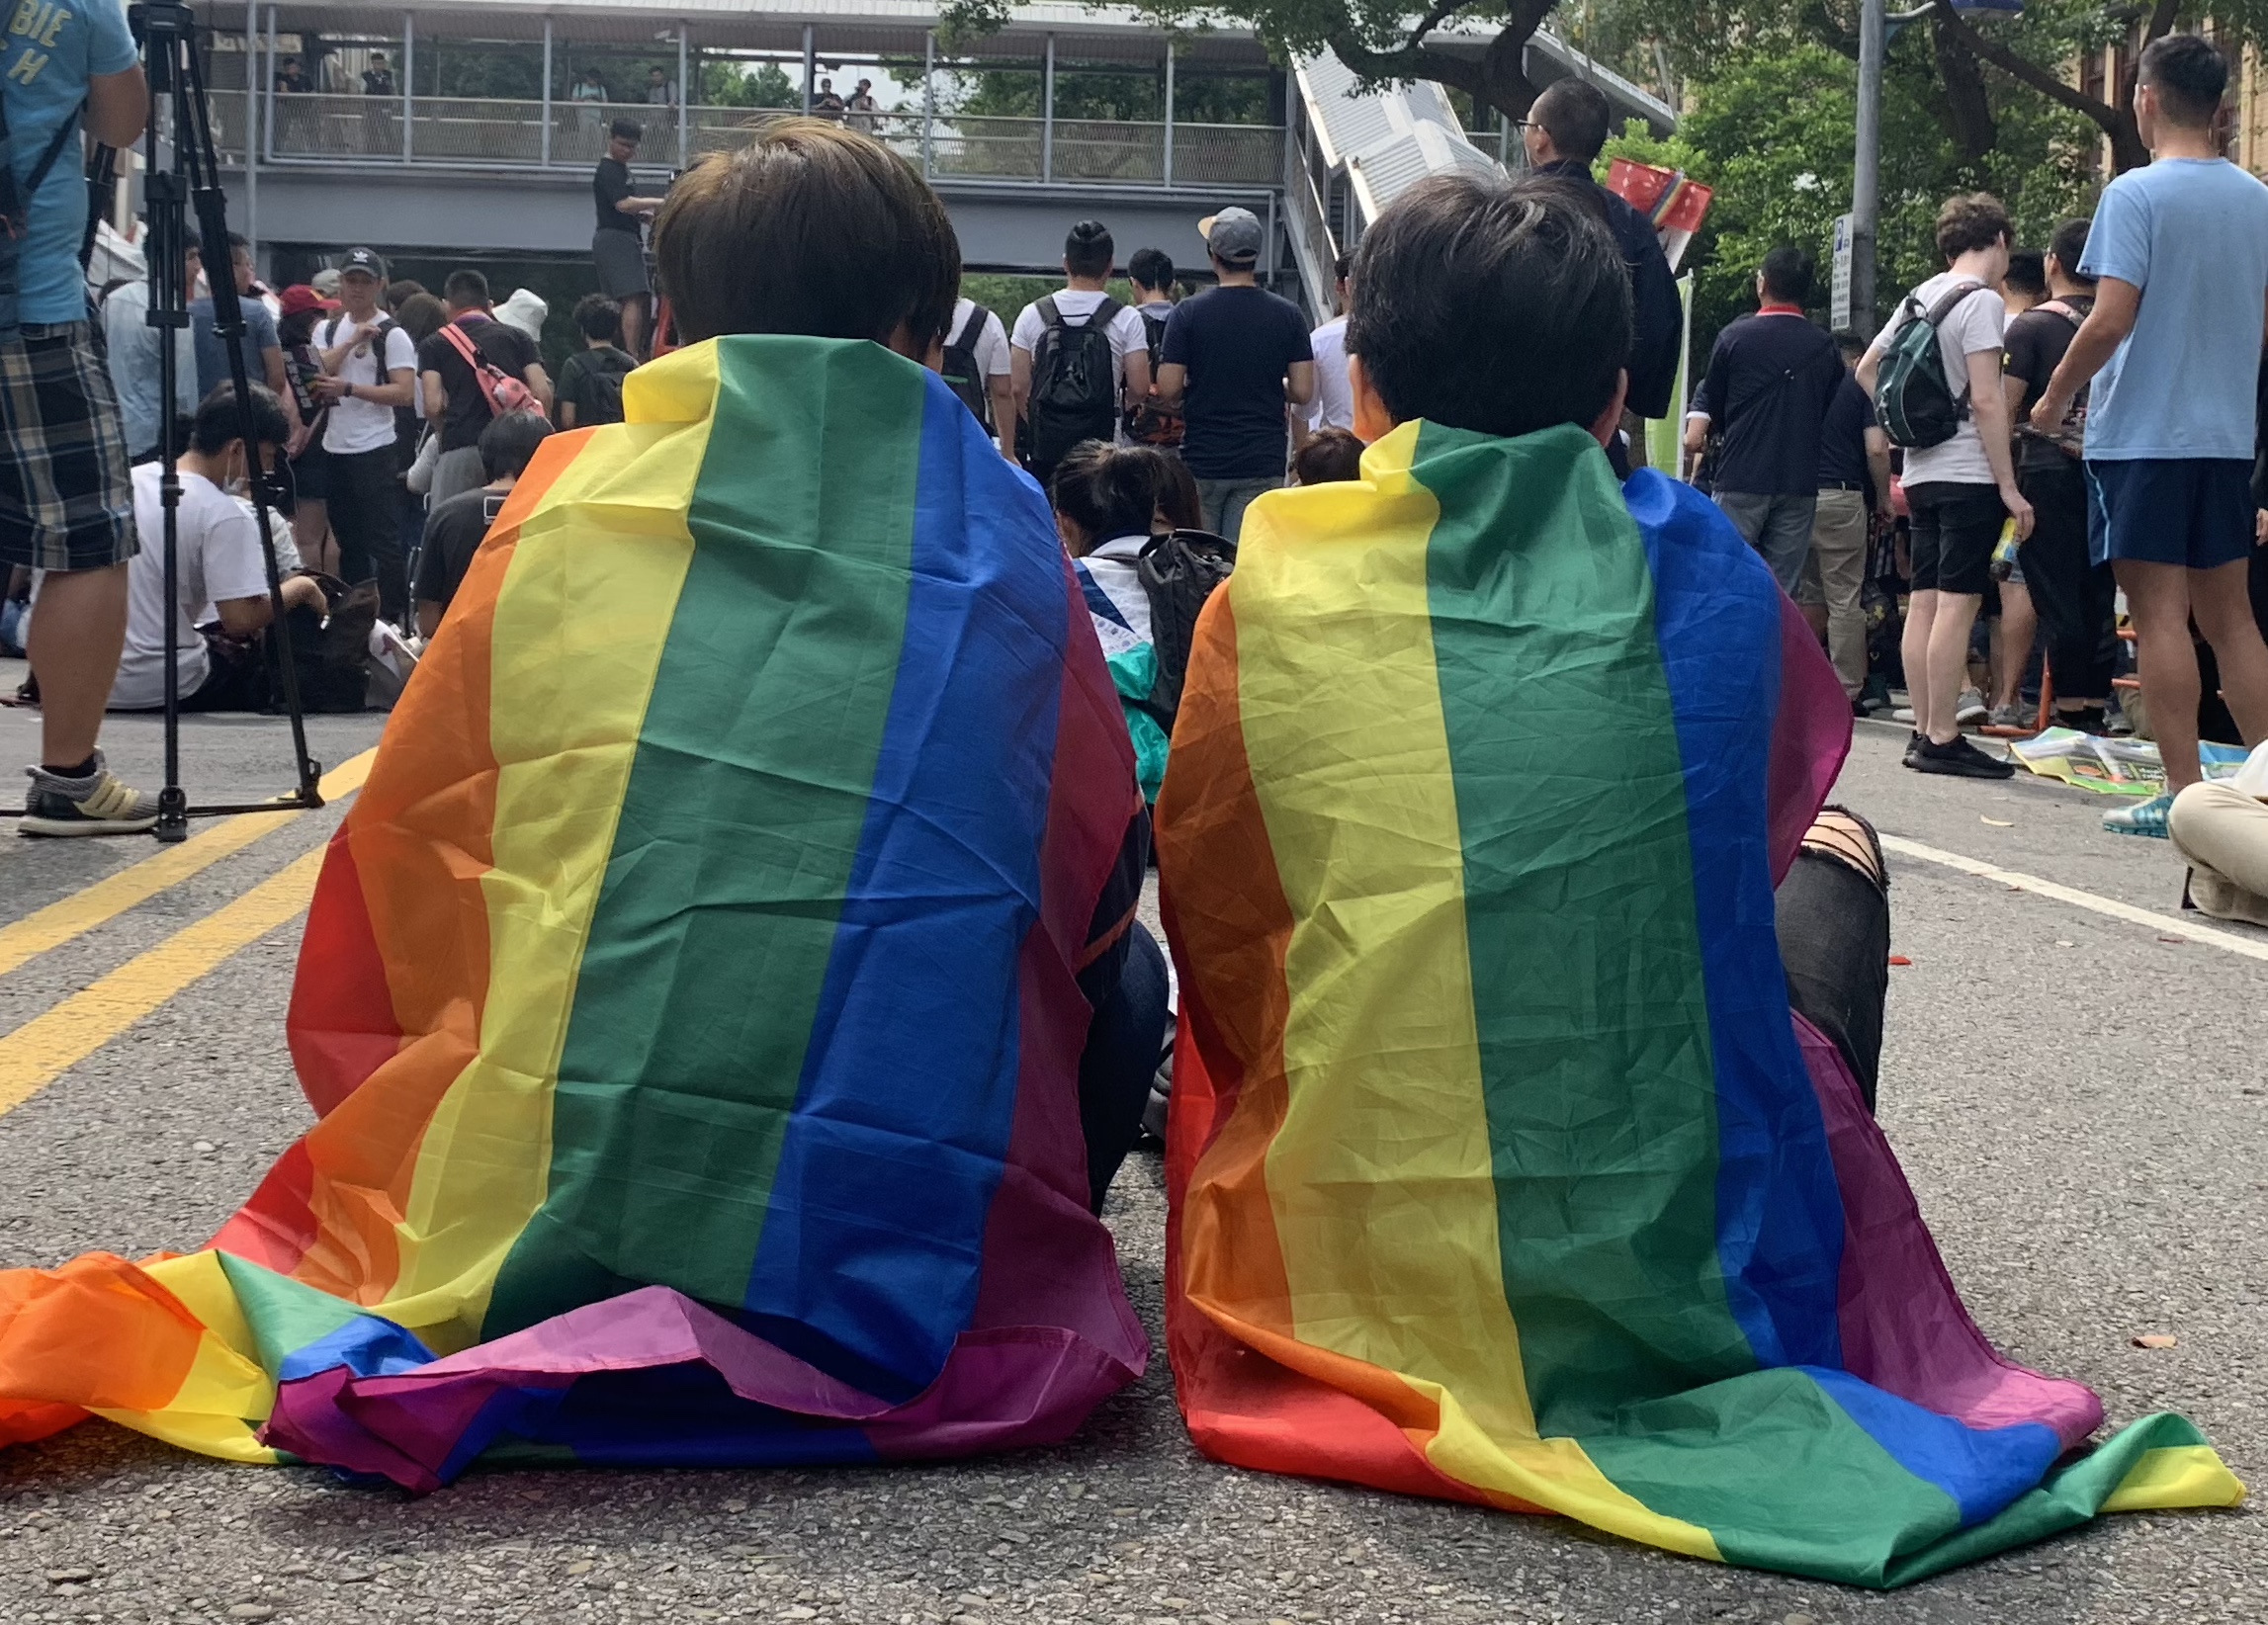 Two LGTB rights supporters covered in rainbow flags attend Taipei's same-sex marriage gathering